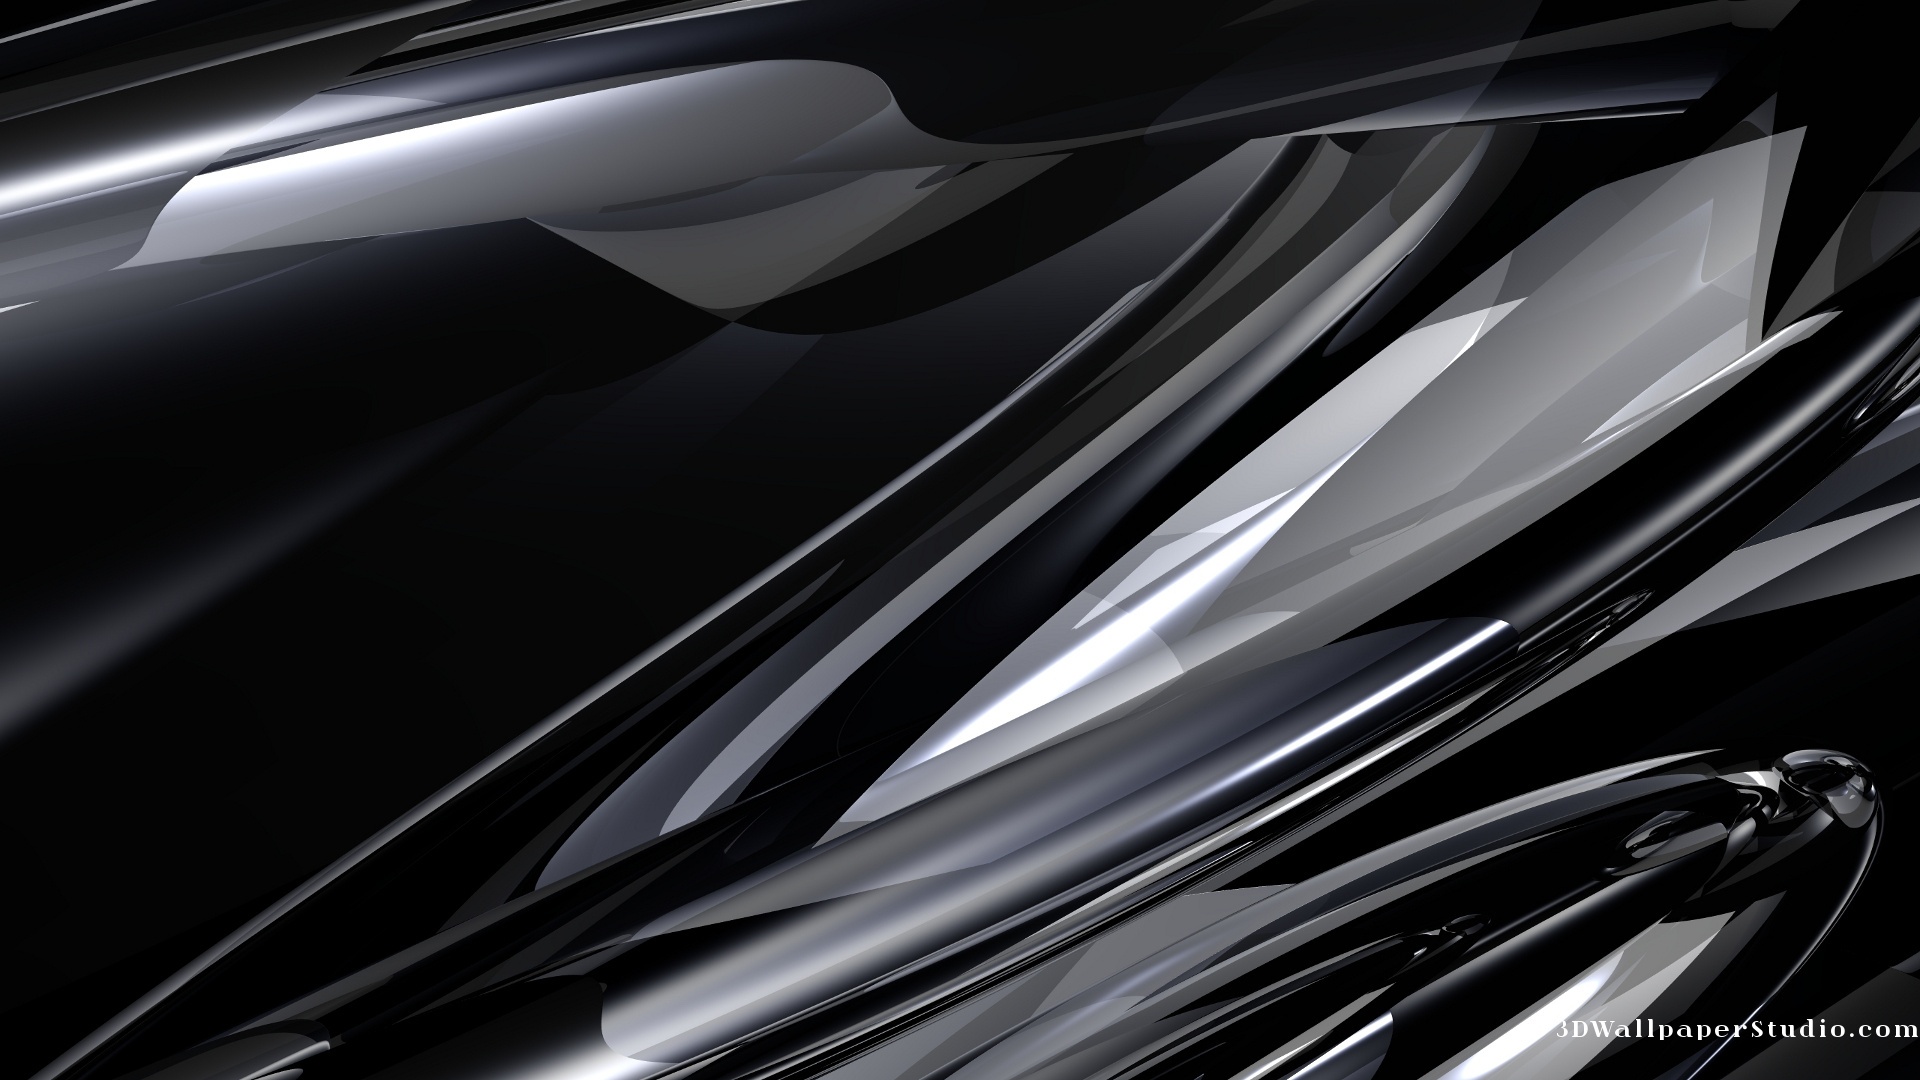 Chrome Wallpaper Background HD With Resolutions Pixel